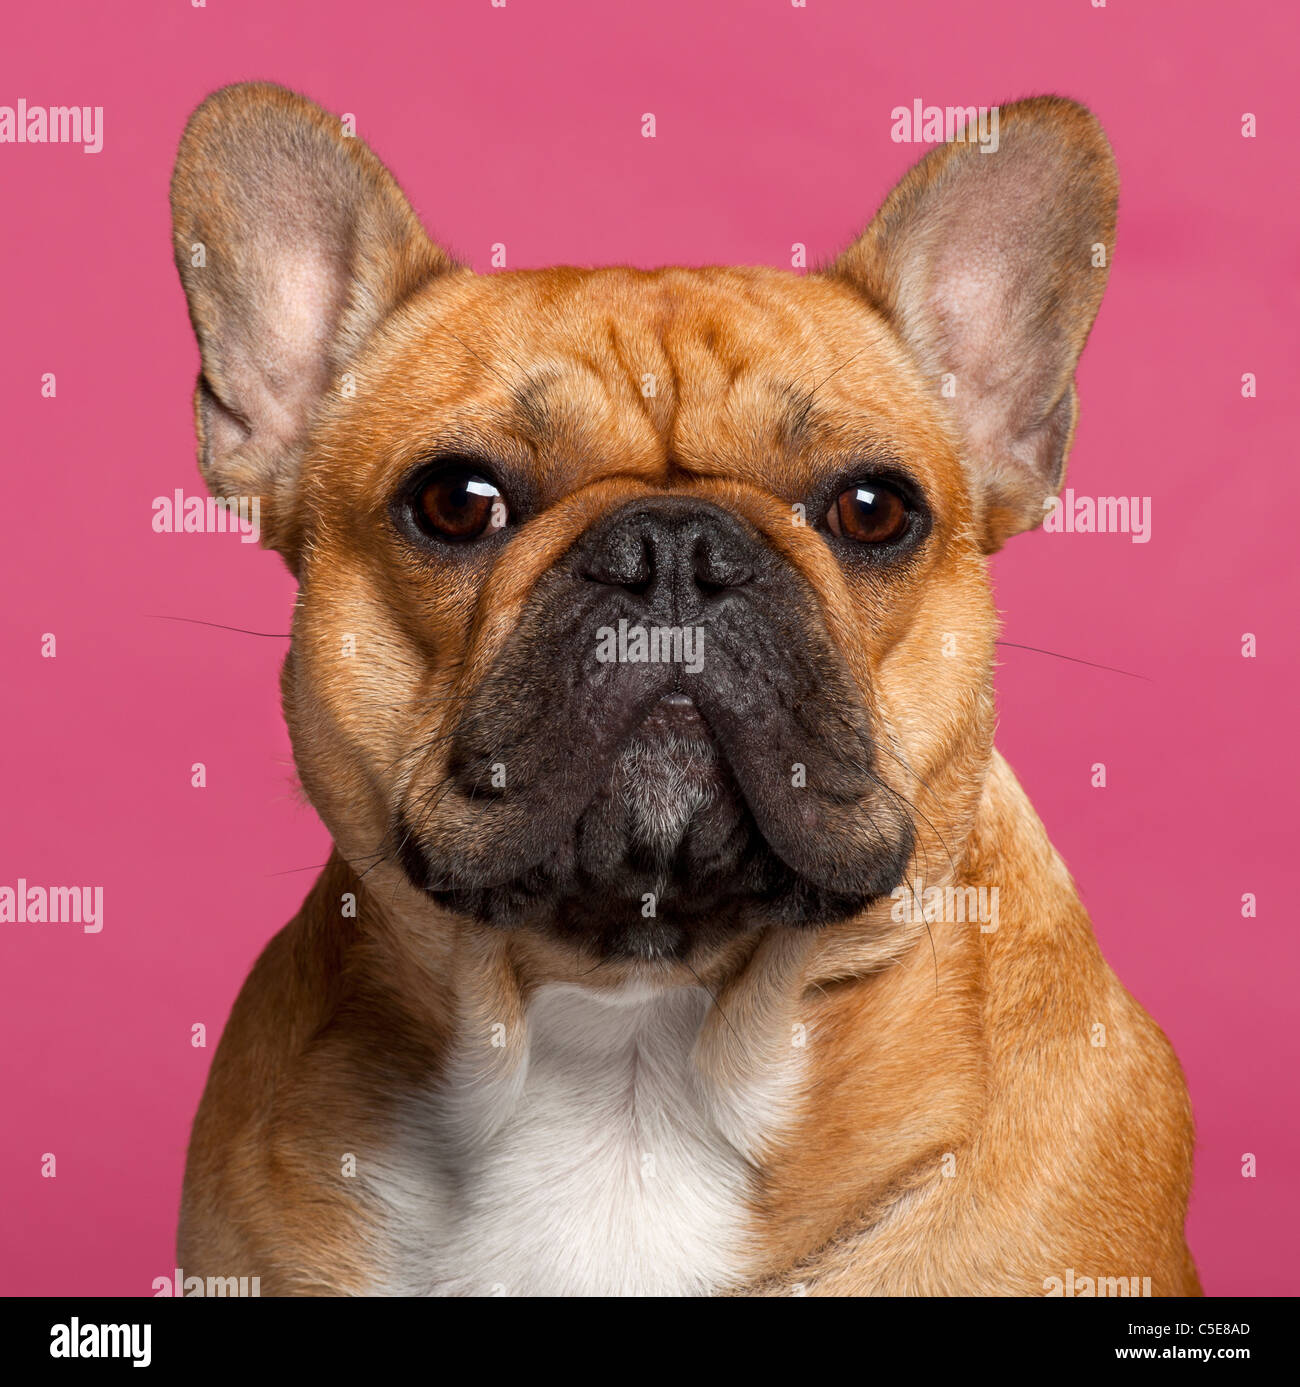 French Bulldog, 1 year old, in front of pink background Stock Photo